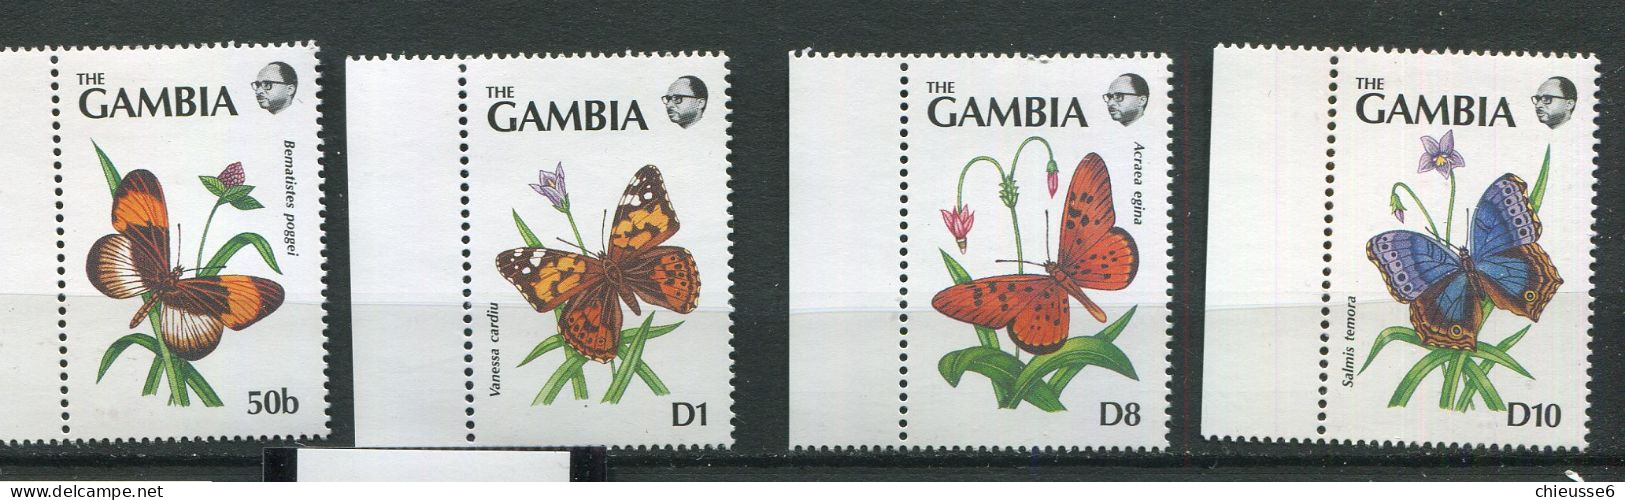 Gambie ** N° 1089 à 1092 - Papillons - Gambie (1965-...)